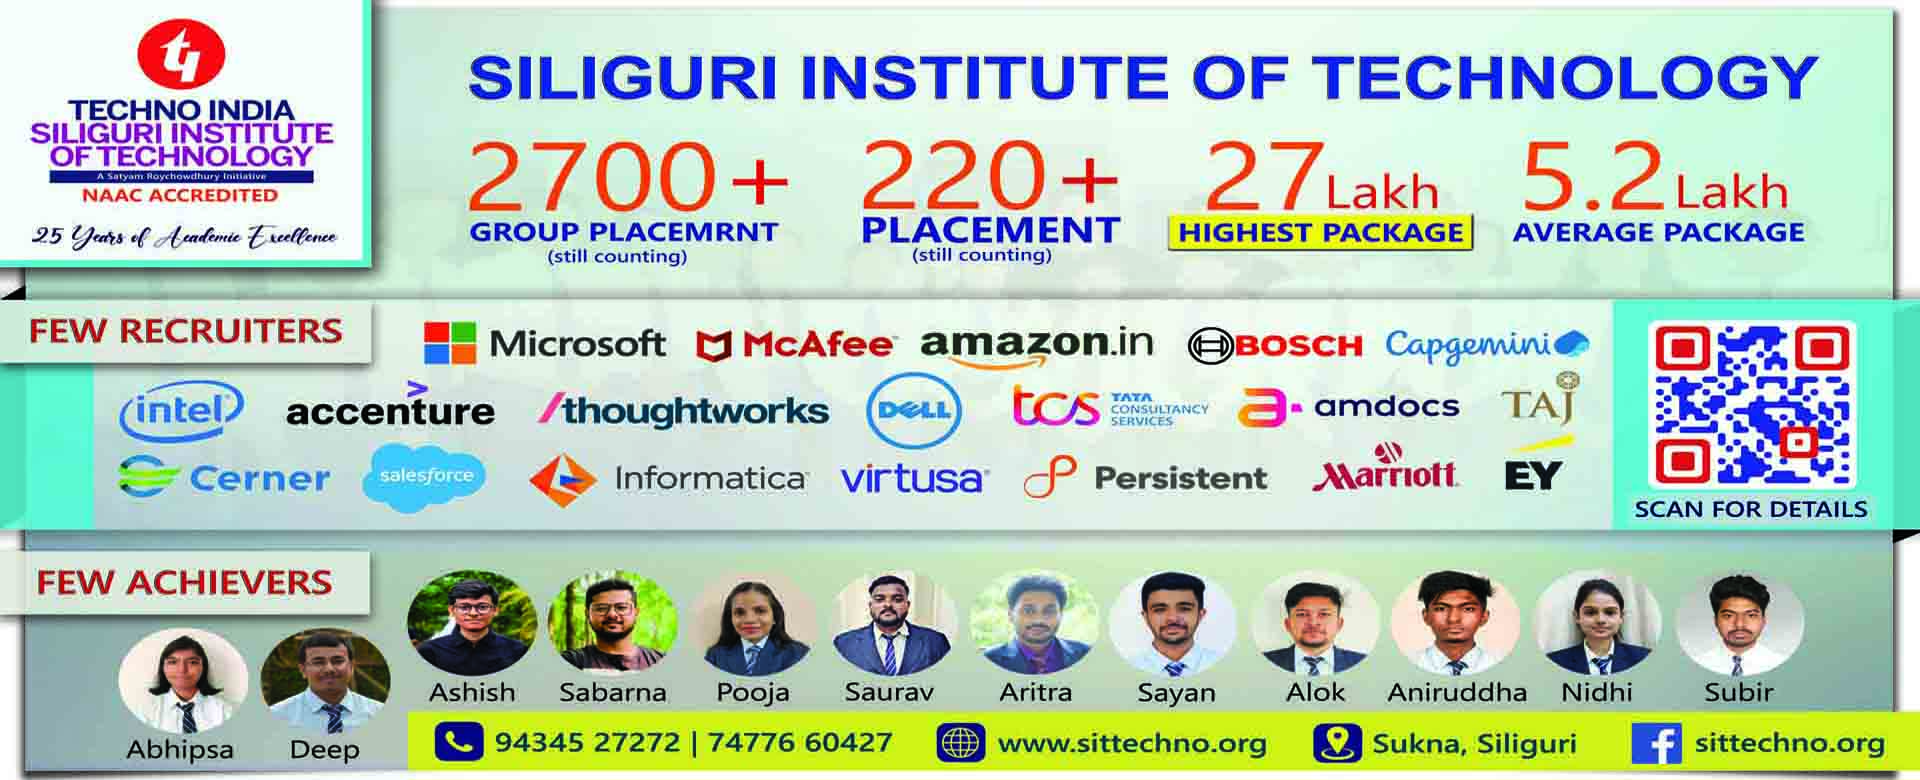 Placement@Siliguri Institute of Technology